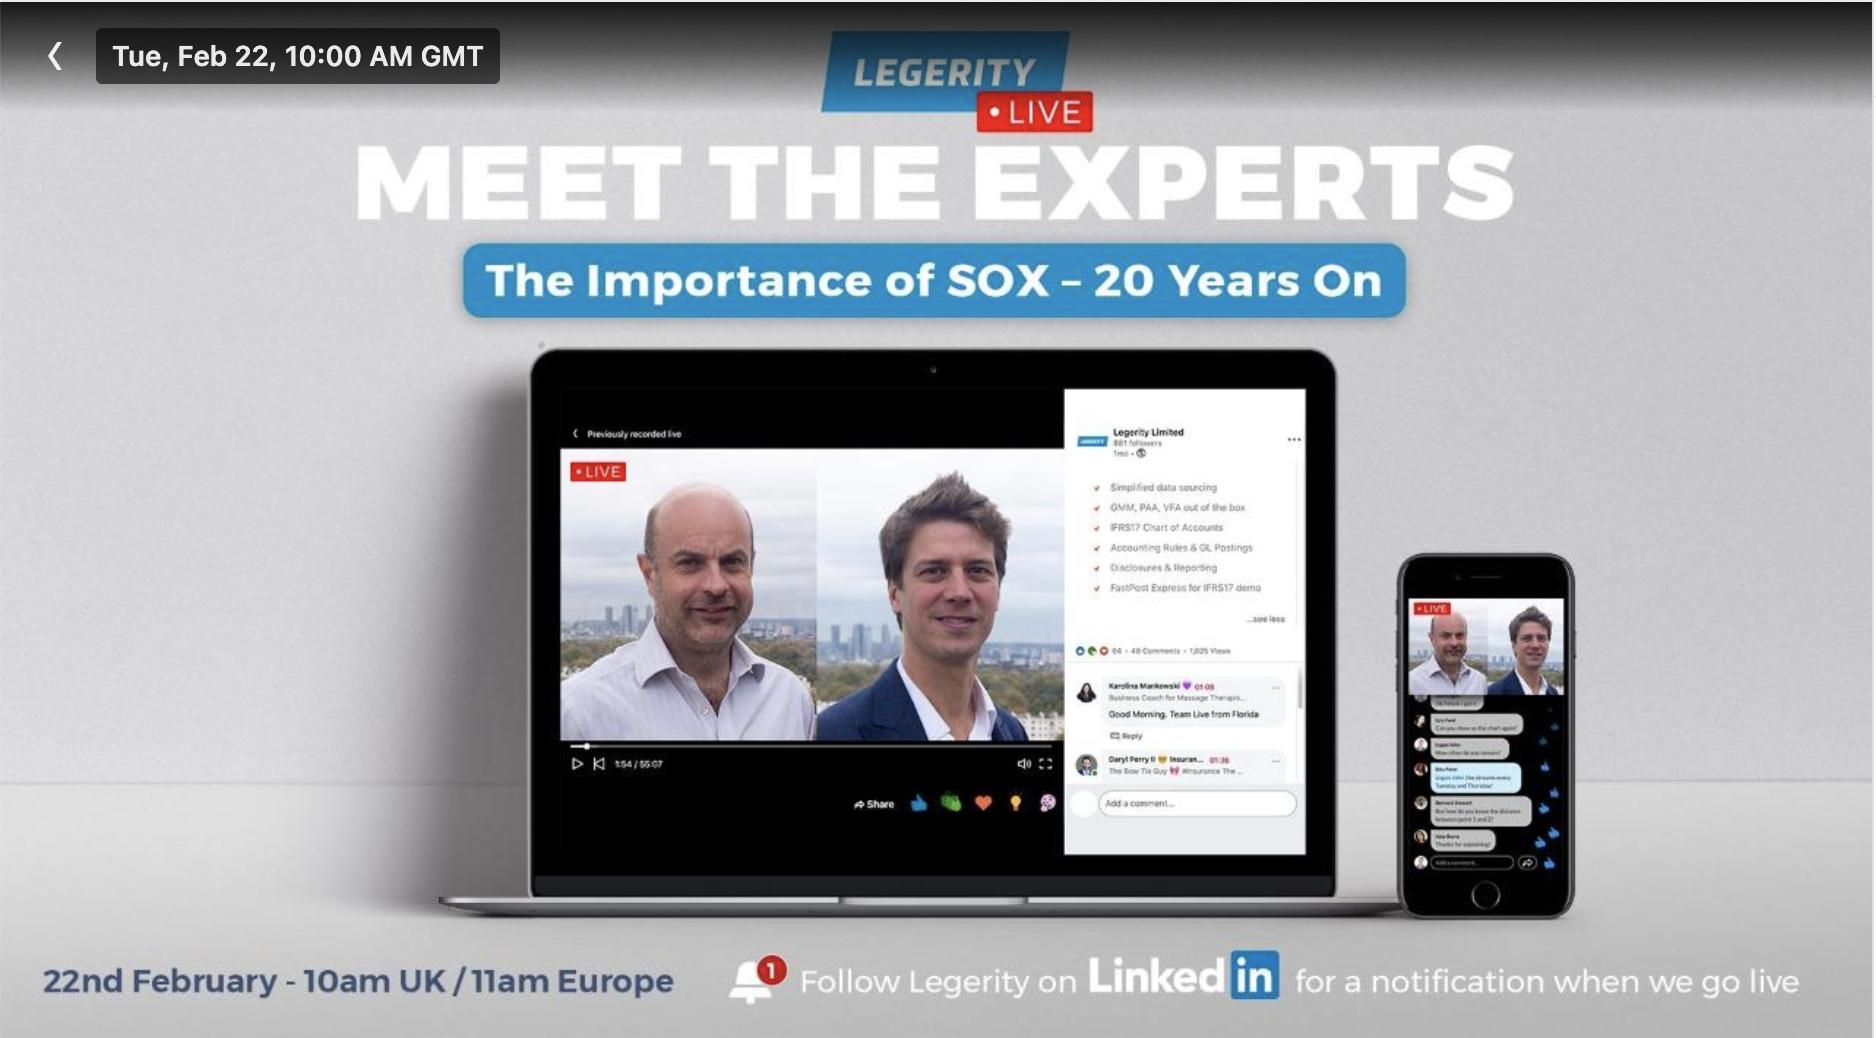 LIVE: Meet the Experts - The Importance of SOX 20 Years On